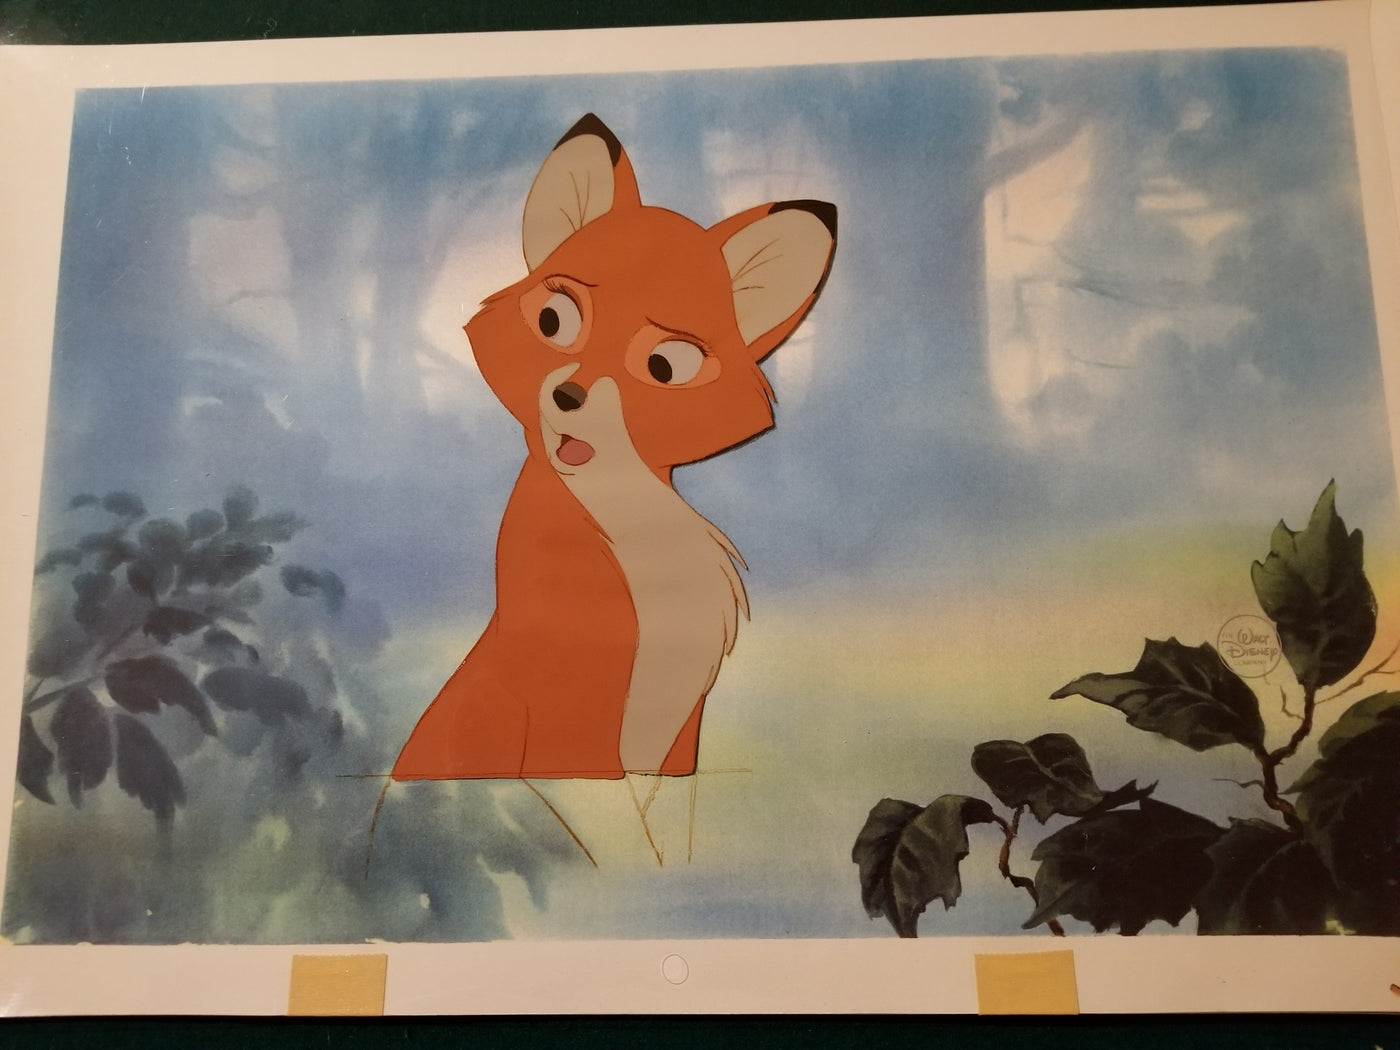 Original Walt Disney Production Cel from The Fox and the Hound featuring Vixey